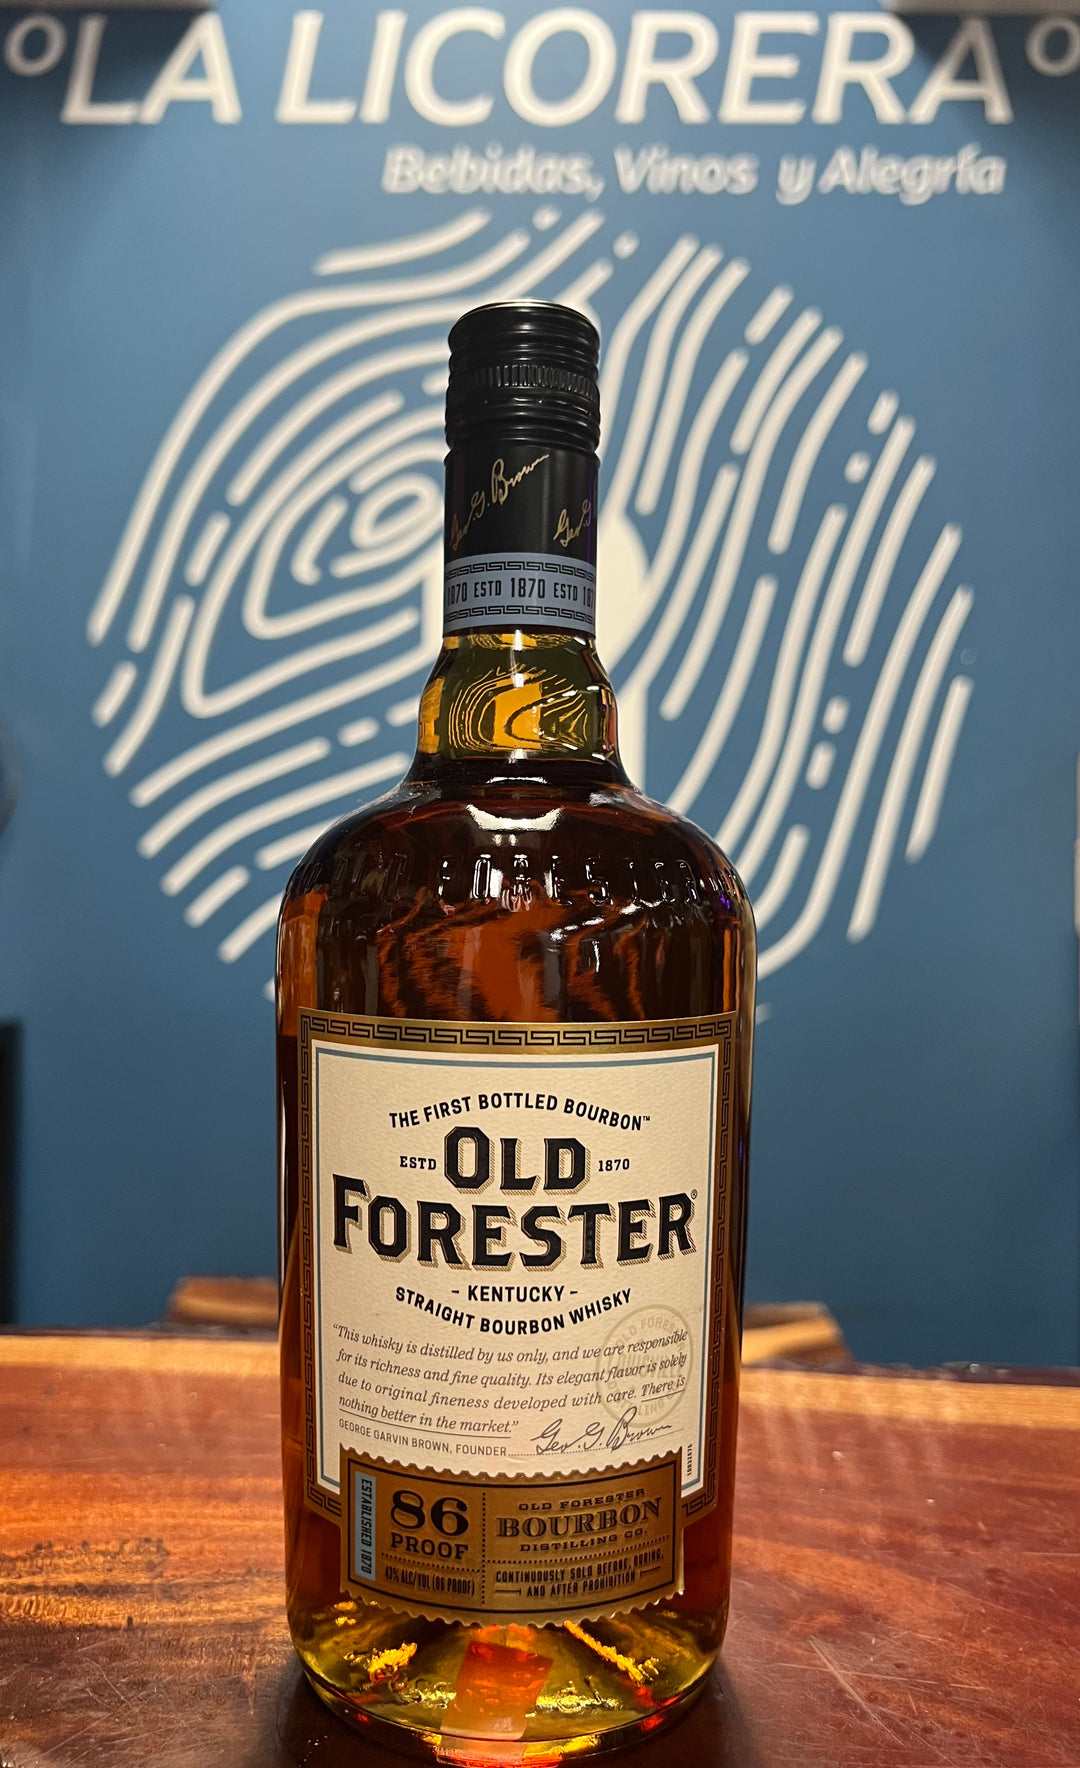 Old Forester 86 Proof Bourbon- 750ml